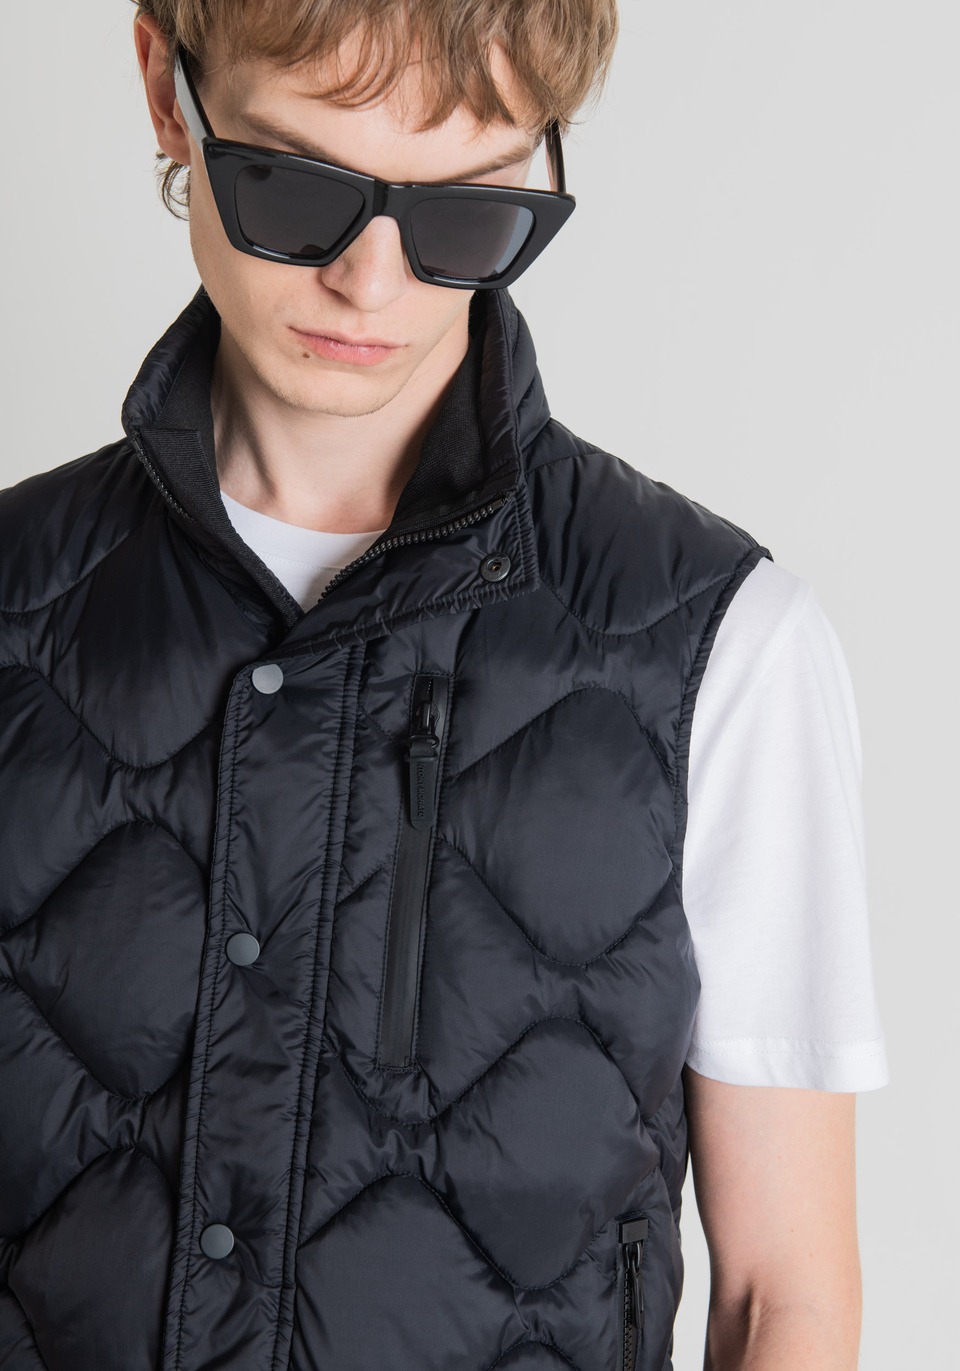 SLIM FIT GILET IN QUILTED TECHNICAL FABRIC - Antony Morato Online Shop